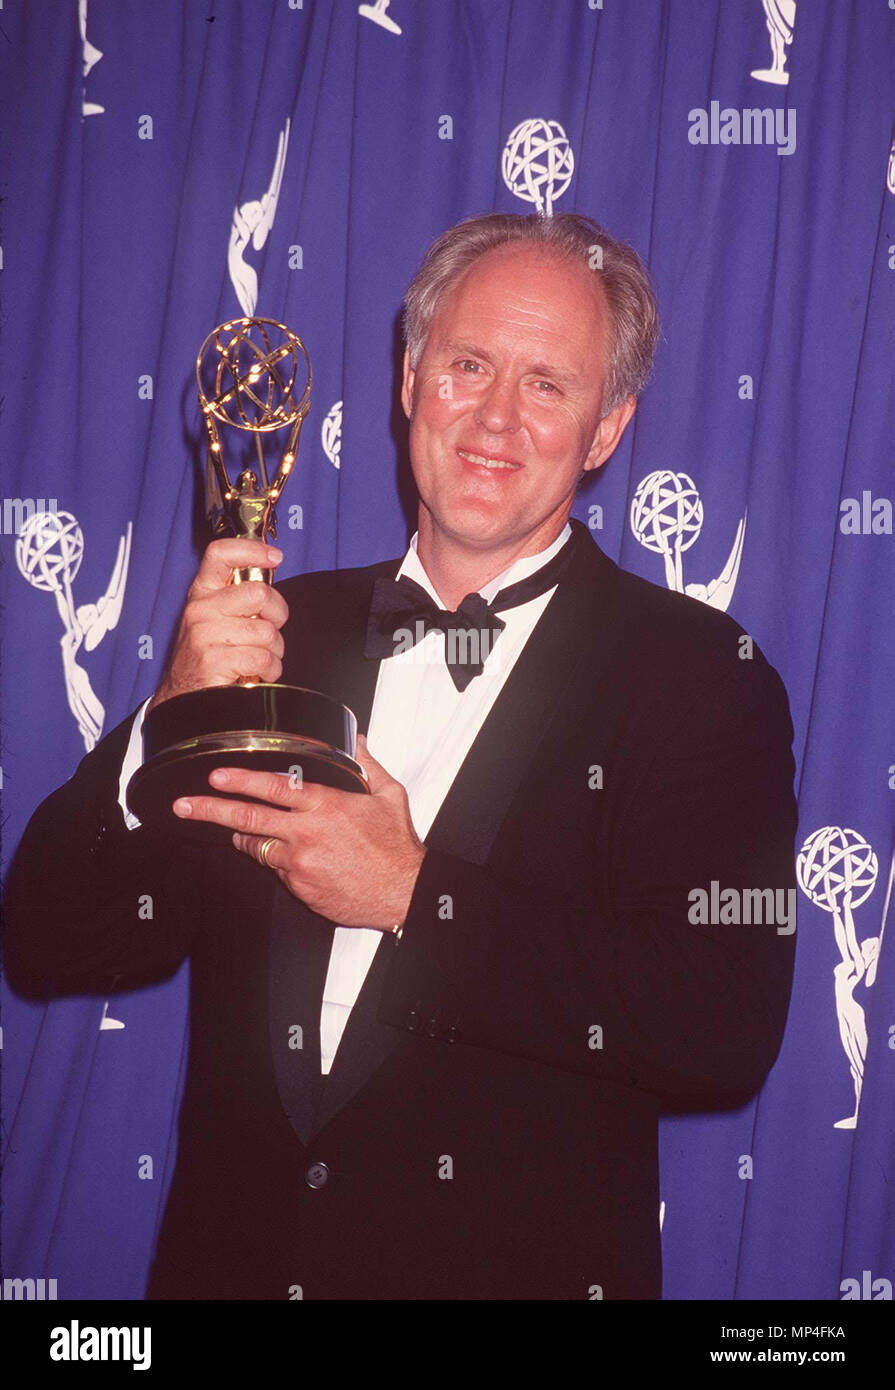 Lithgow JohnLithgow John -lead act. comedy  Event in Hollywood Life - California, Red Carpet Event, USA, Film Industry, Celebrities, Photography, Bestof, Arts Culture and Entertainment, Topix Celebrities fashion, Best of, Hollywood Life, Event in Hollywood Life - California,  backstage trophy, Awards show, movie celebrities, TV celebrities, Music celebrities, Topix, Bestof, Arts Culture and Entertainment, Photography,    inquiry tsuni@Gamma-USA.com , Credit Tsuni / USA, 1993-1994-1995-1996-1997-1998-1999 Stock Photo